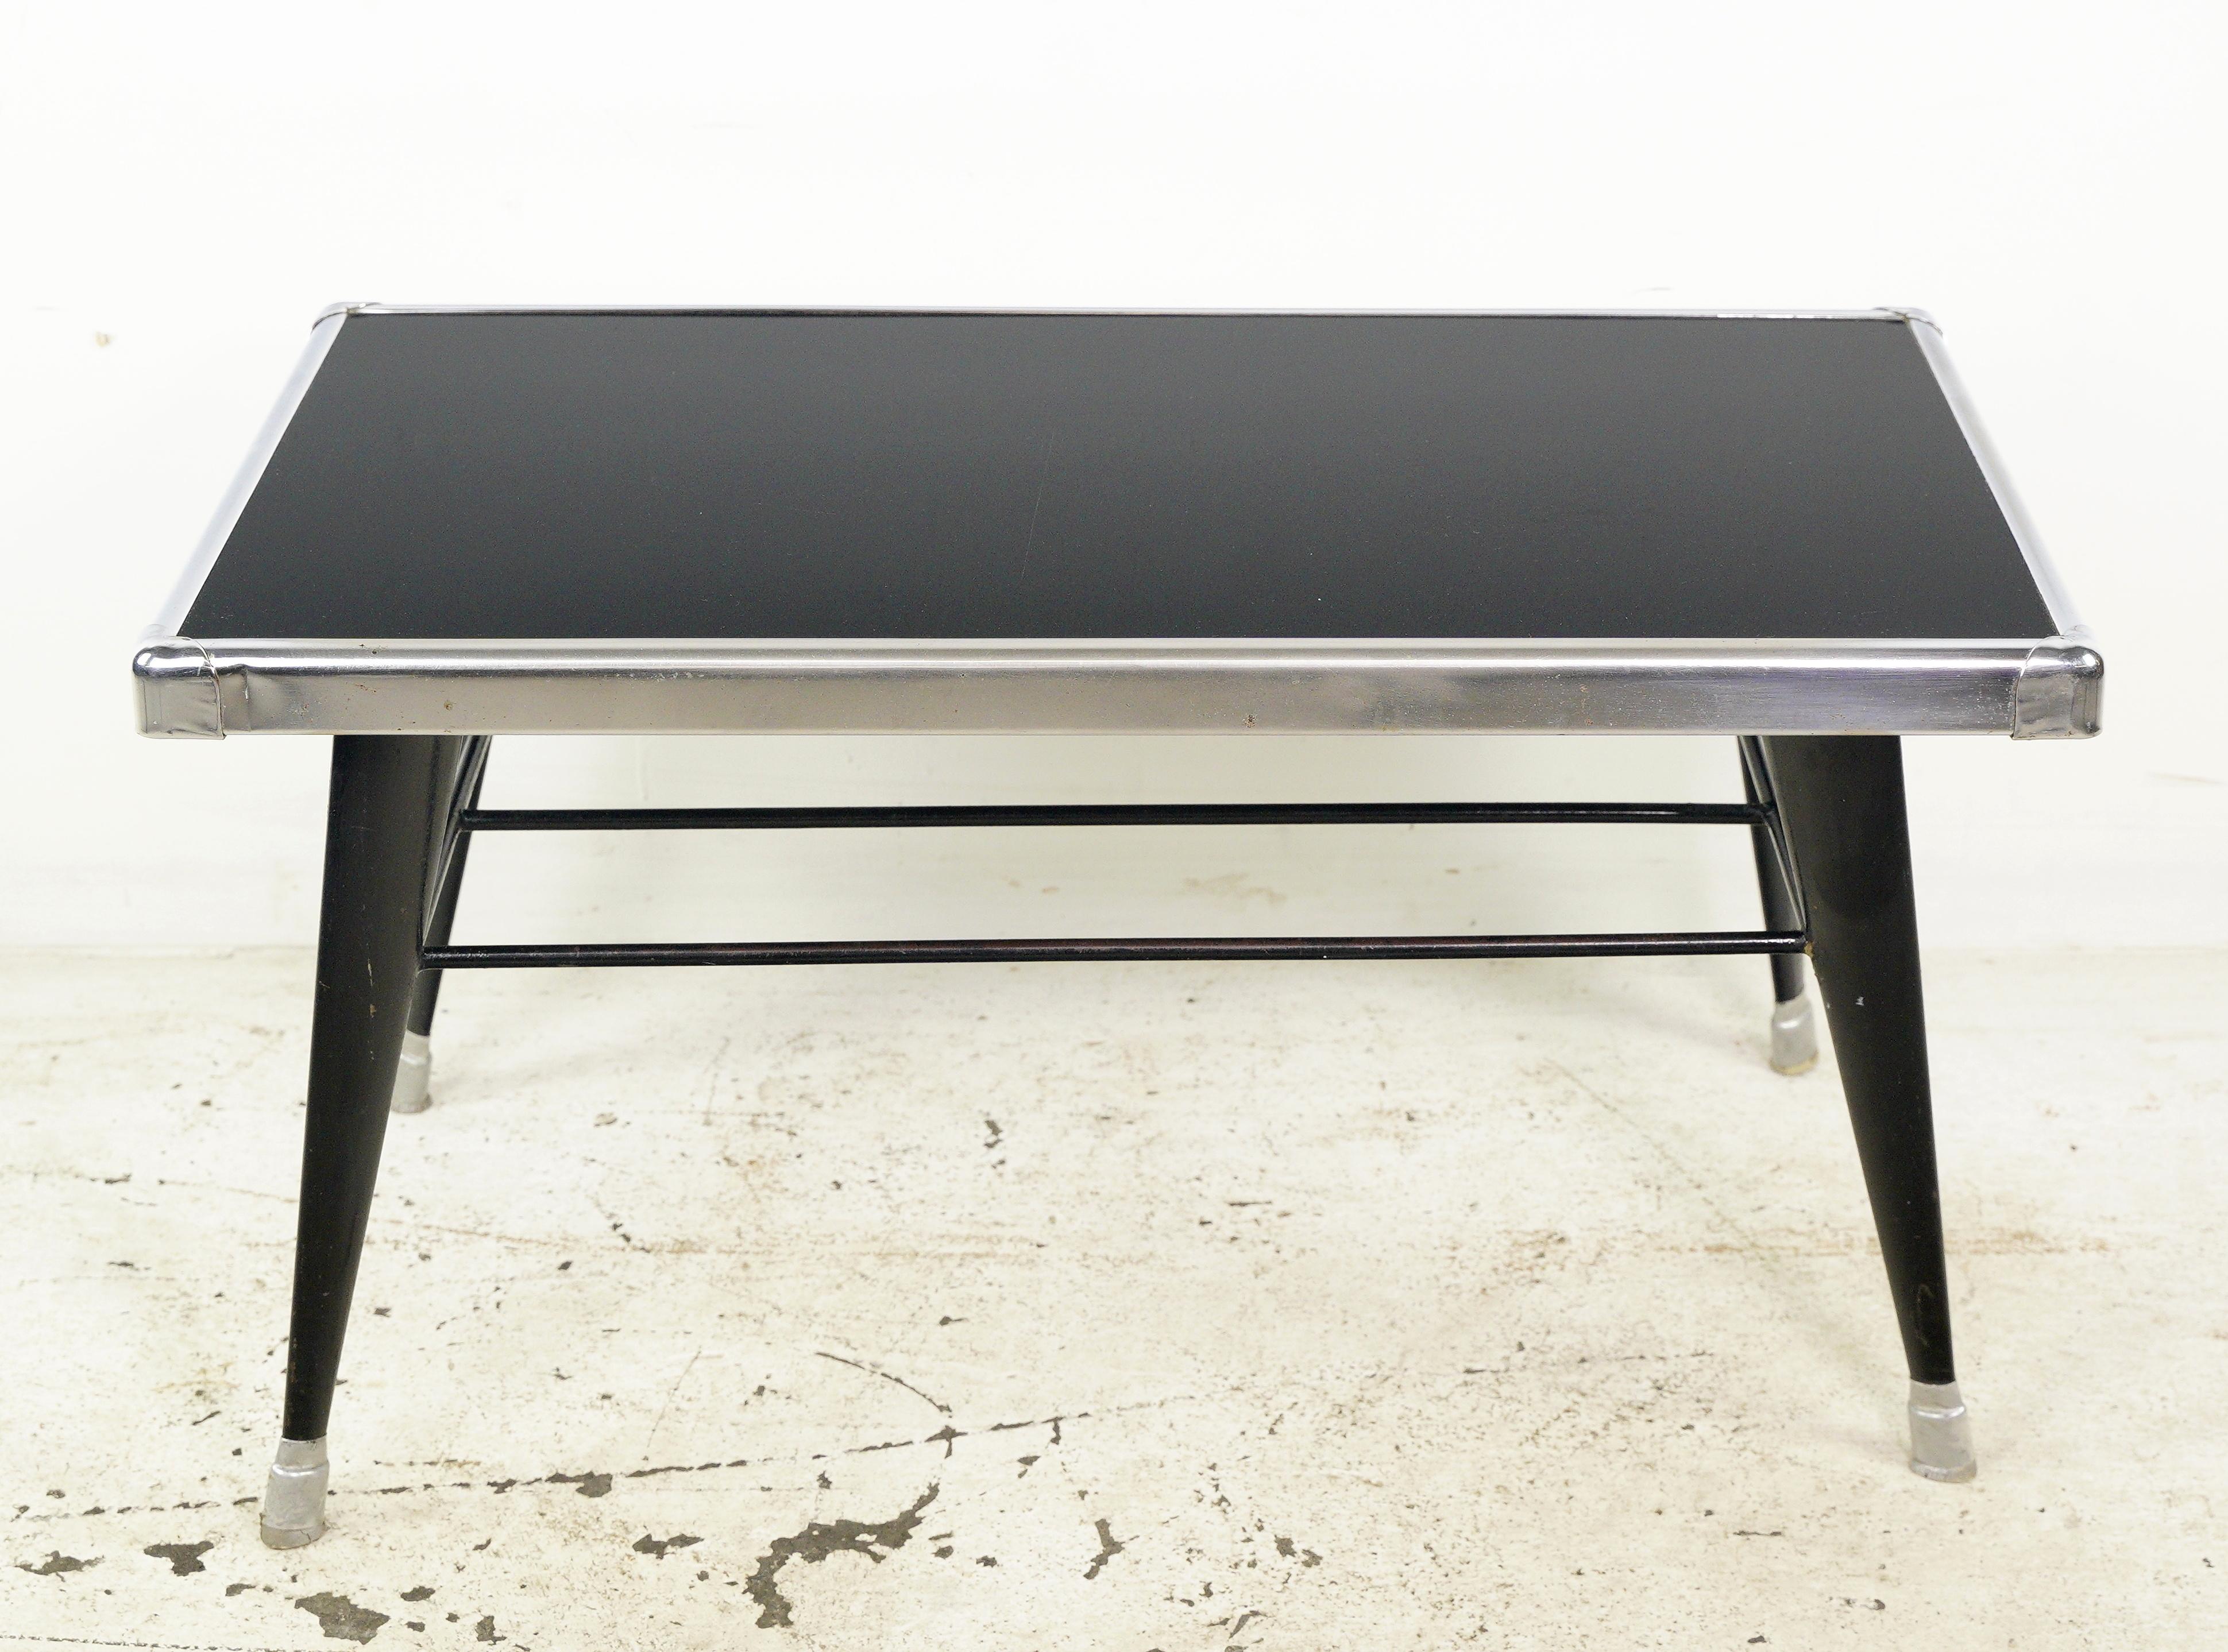 A European Mid-Century Modern coffee table from the 1950s, crafted with a combination of glass and steel. This piece reflects the design sensibilities of the era, offering a stylish and functional addition to living spaces with its unique blend of